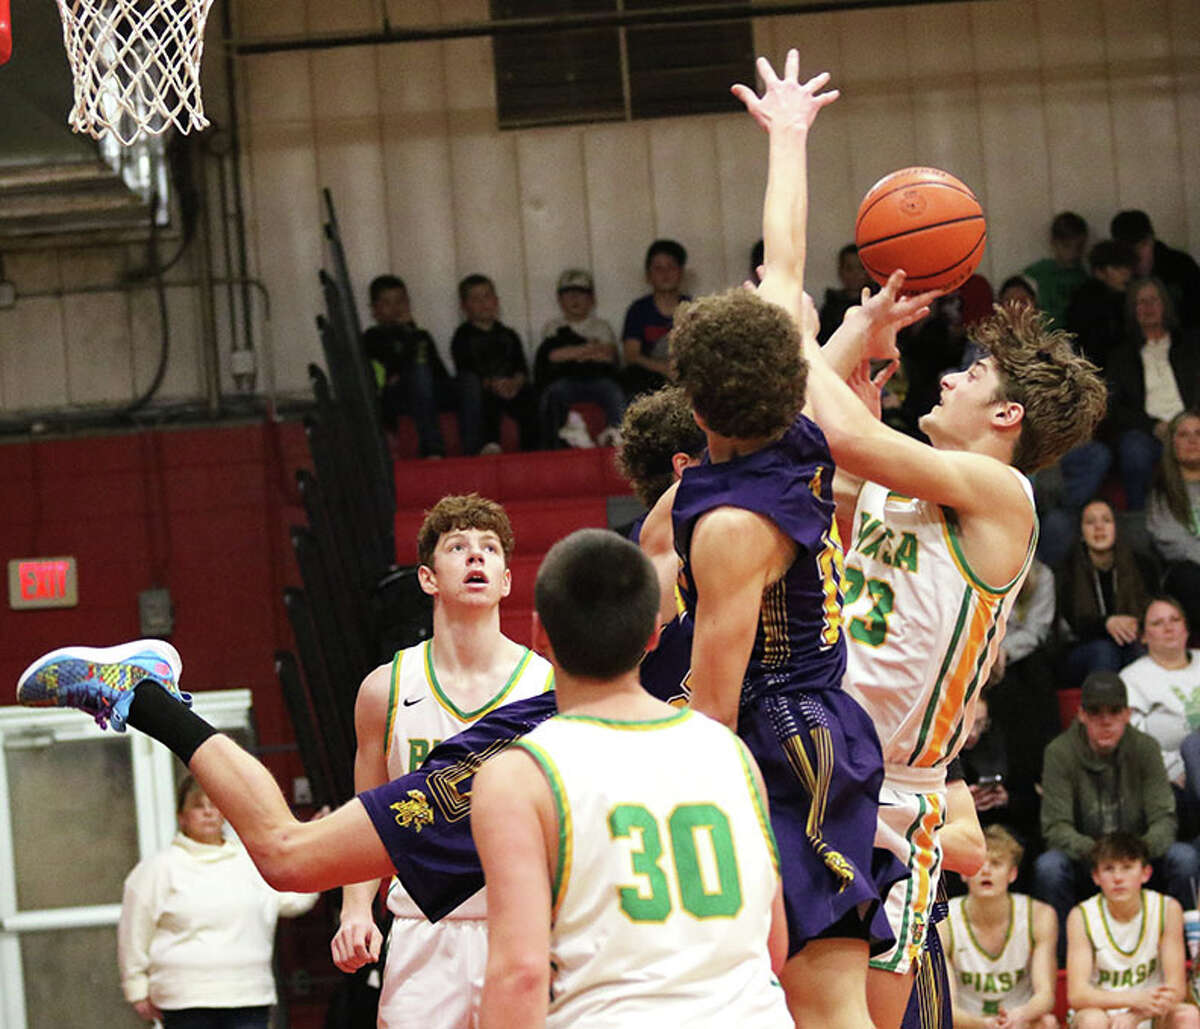 Southwestern's Greyson Brewer (right) puts up a shot against Mount Olive on Monday in a first-round game of the 104th annual Macoupin County Tournament at Hlafka Hall in Bunker Hill.